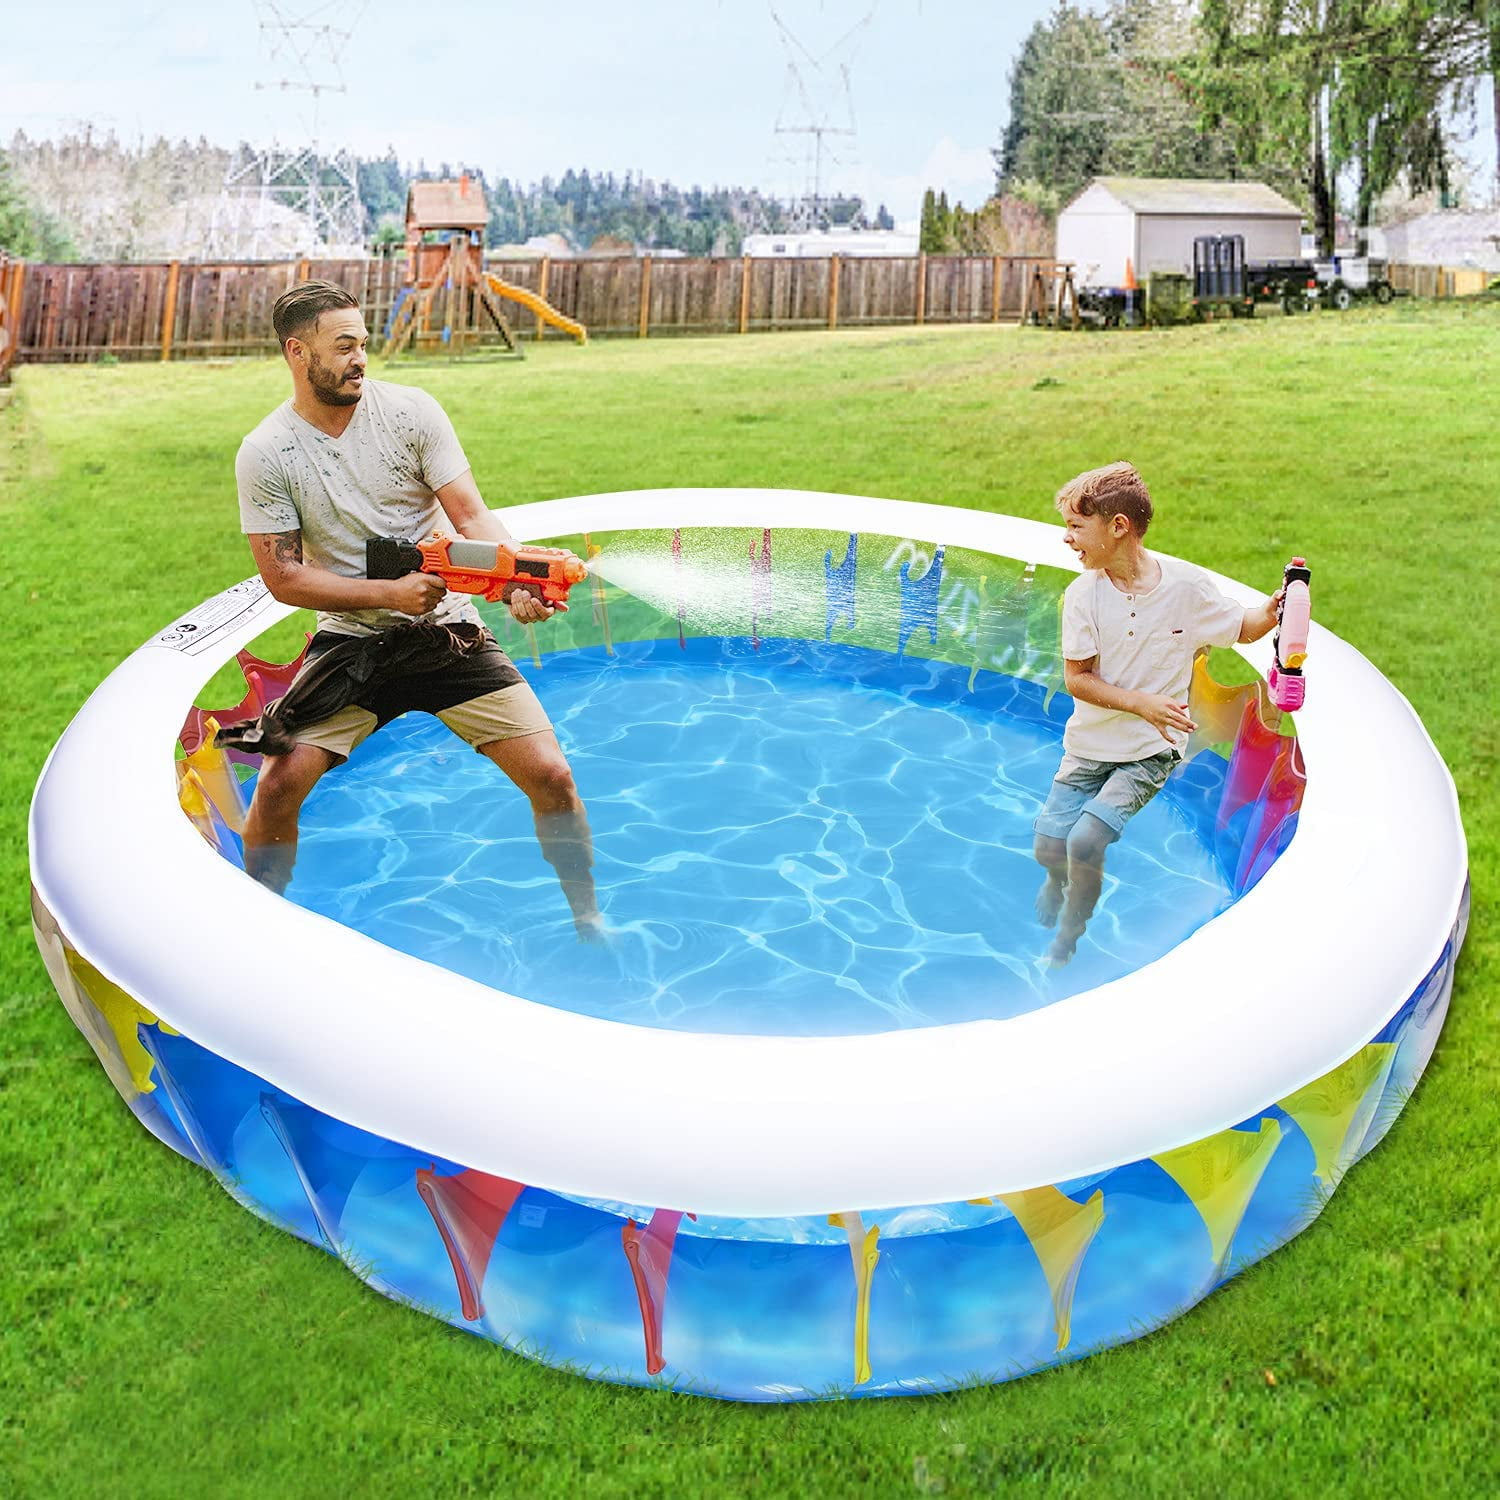 YGFZ 2021 Summer Hot top Inflatable Pool Family Water Game Play Center for Kids 3 Swimming Pool 